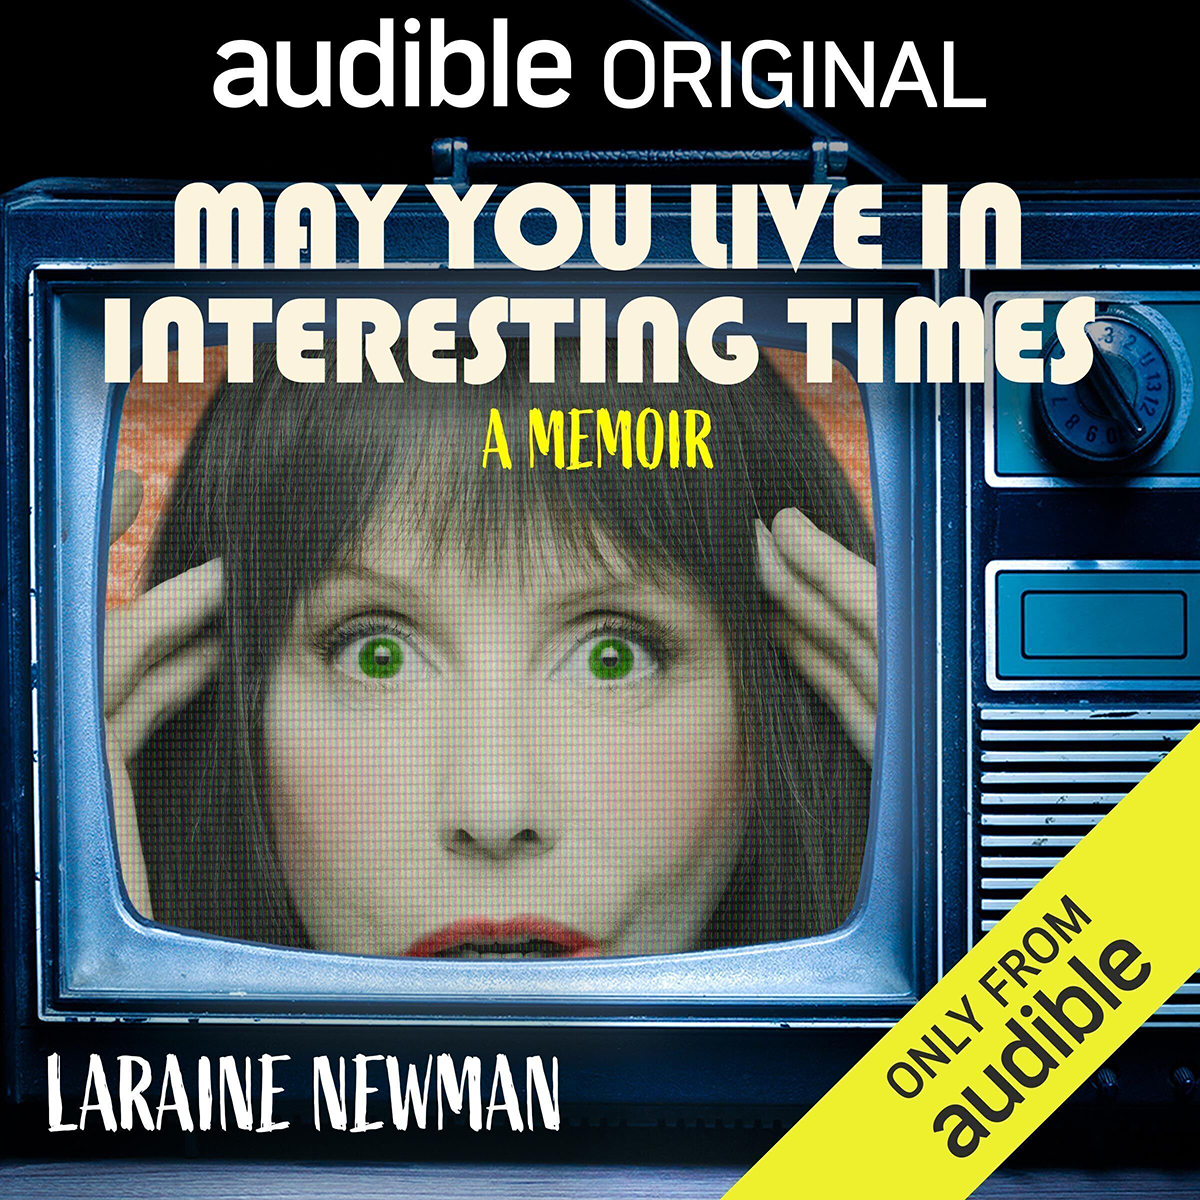 'May You Live In Interesting Times' by Laraine Newman